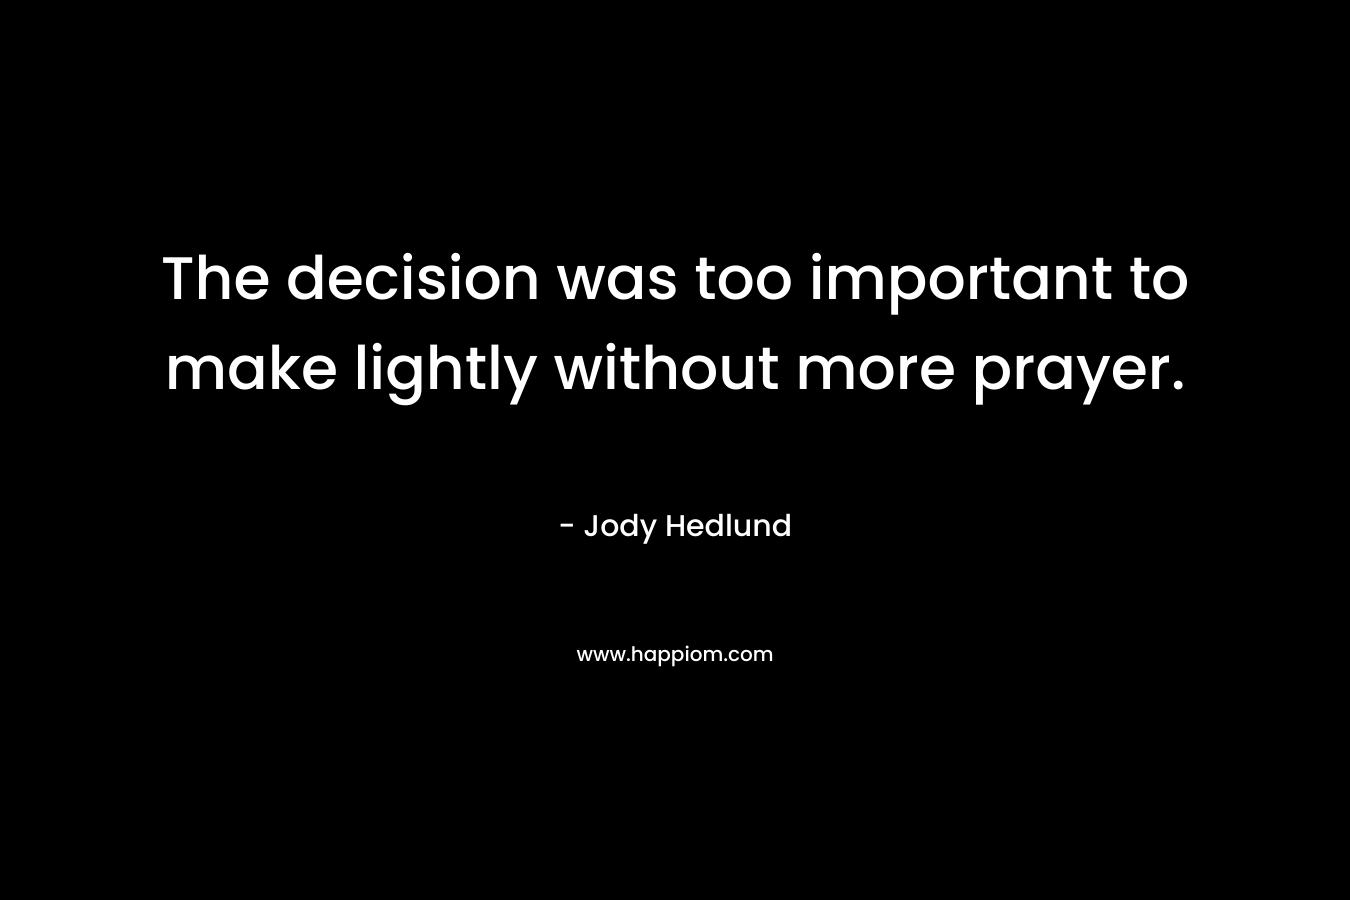 The decision was too important to make lightly without more prayer.